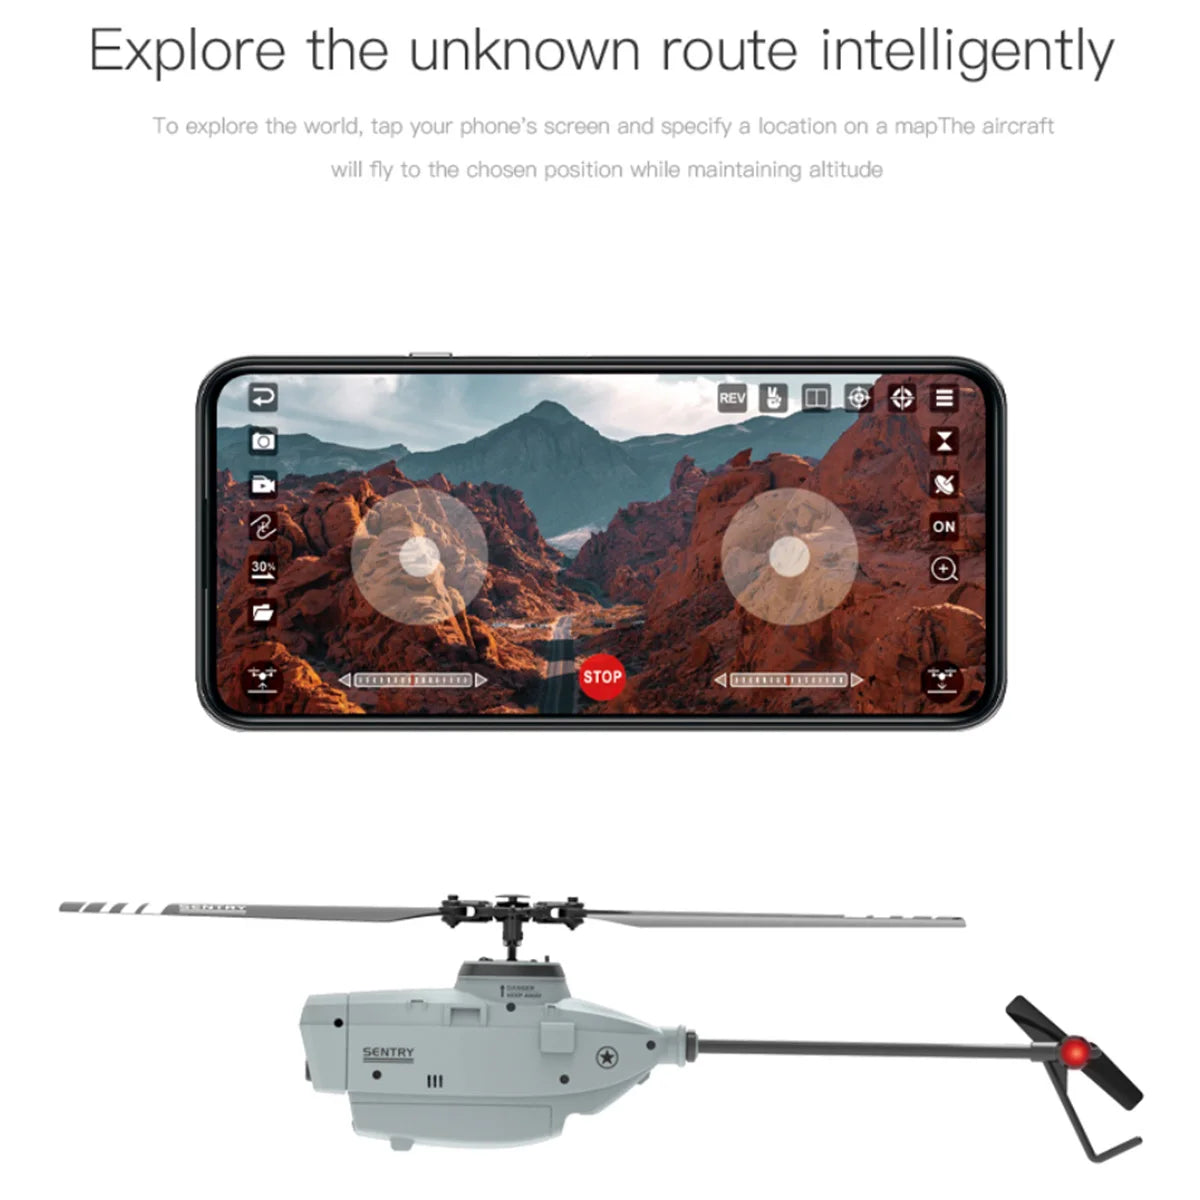 C127 2.4G RC Helicopter, aircraft will fly to the choson position while maintaining altitude . tap your phone'